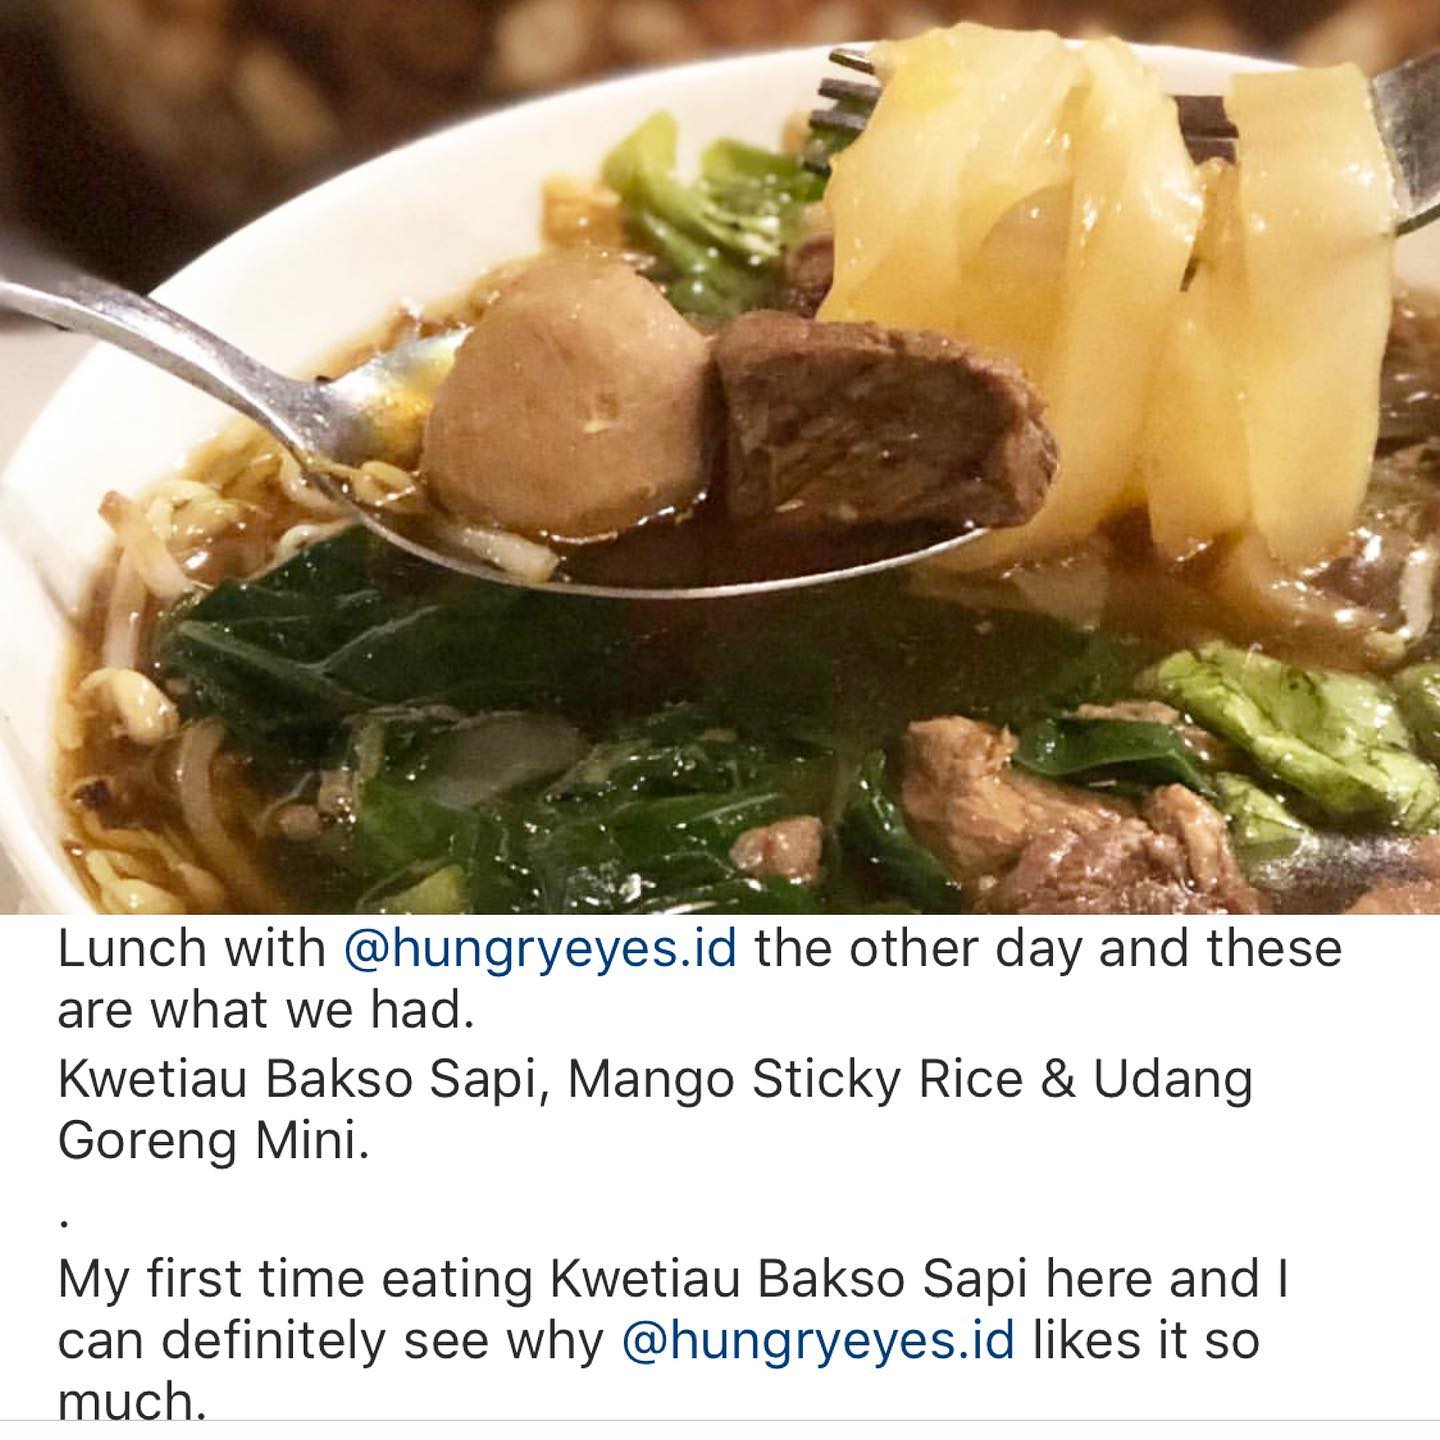 Kwetiao Bakso Sapi Thailand Kinley Thai Bistro
Thank you @zhoueats @hungryeyes.id for your kindest review. ️️️
Read more